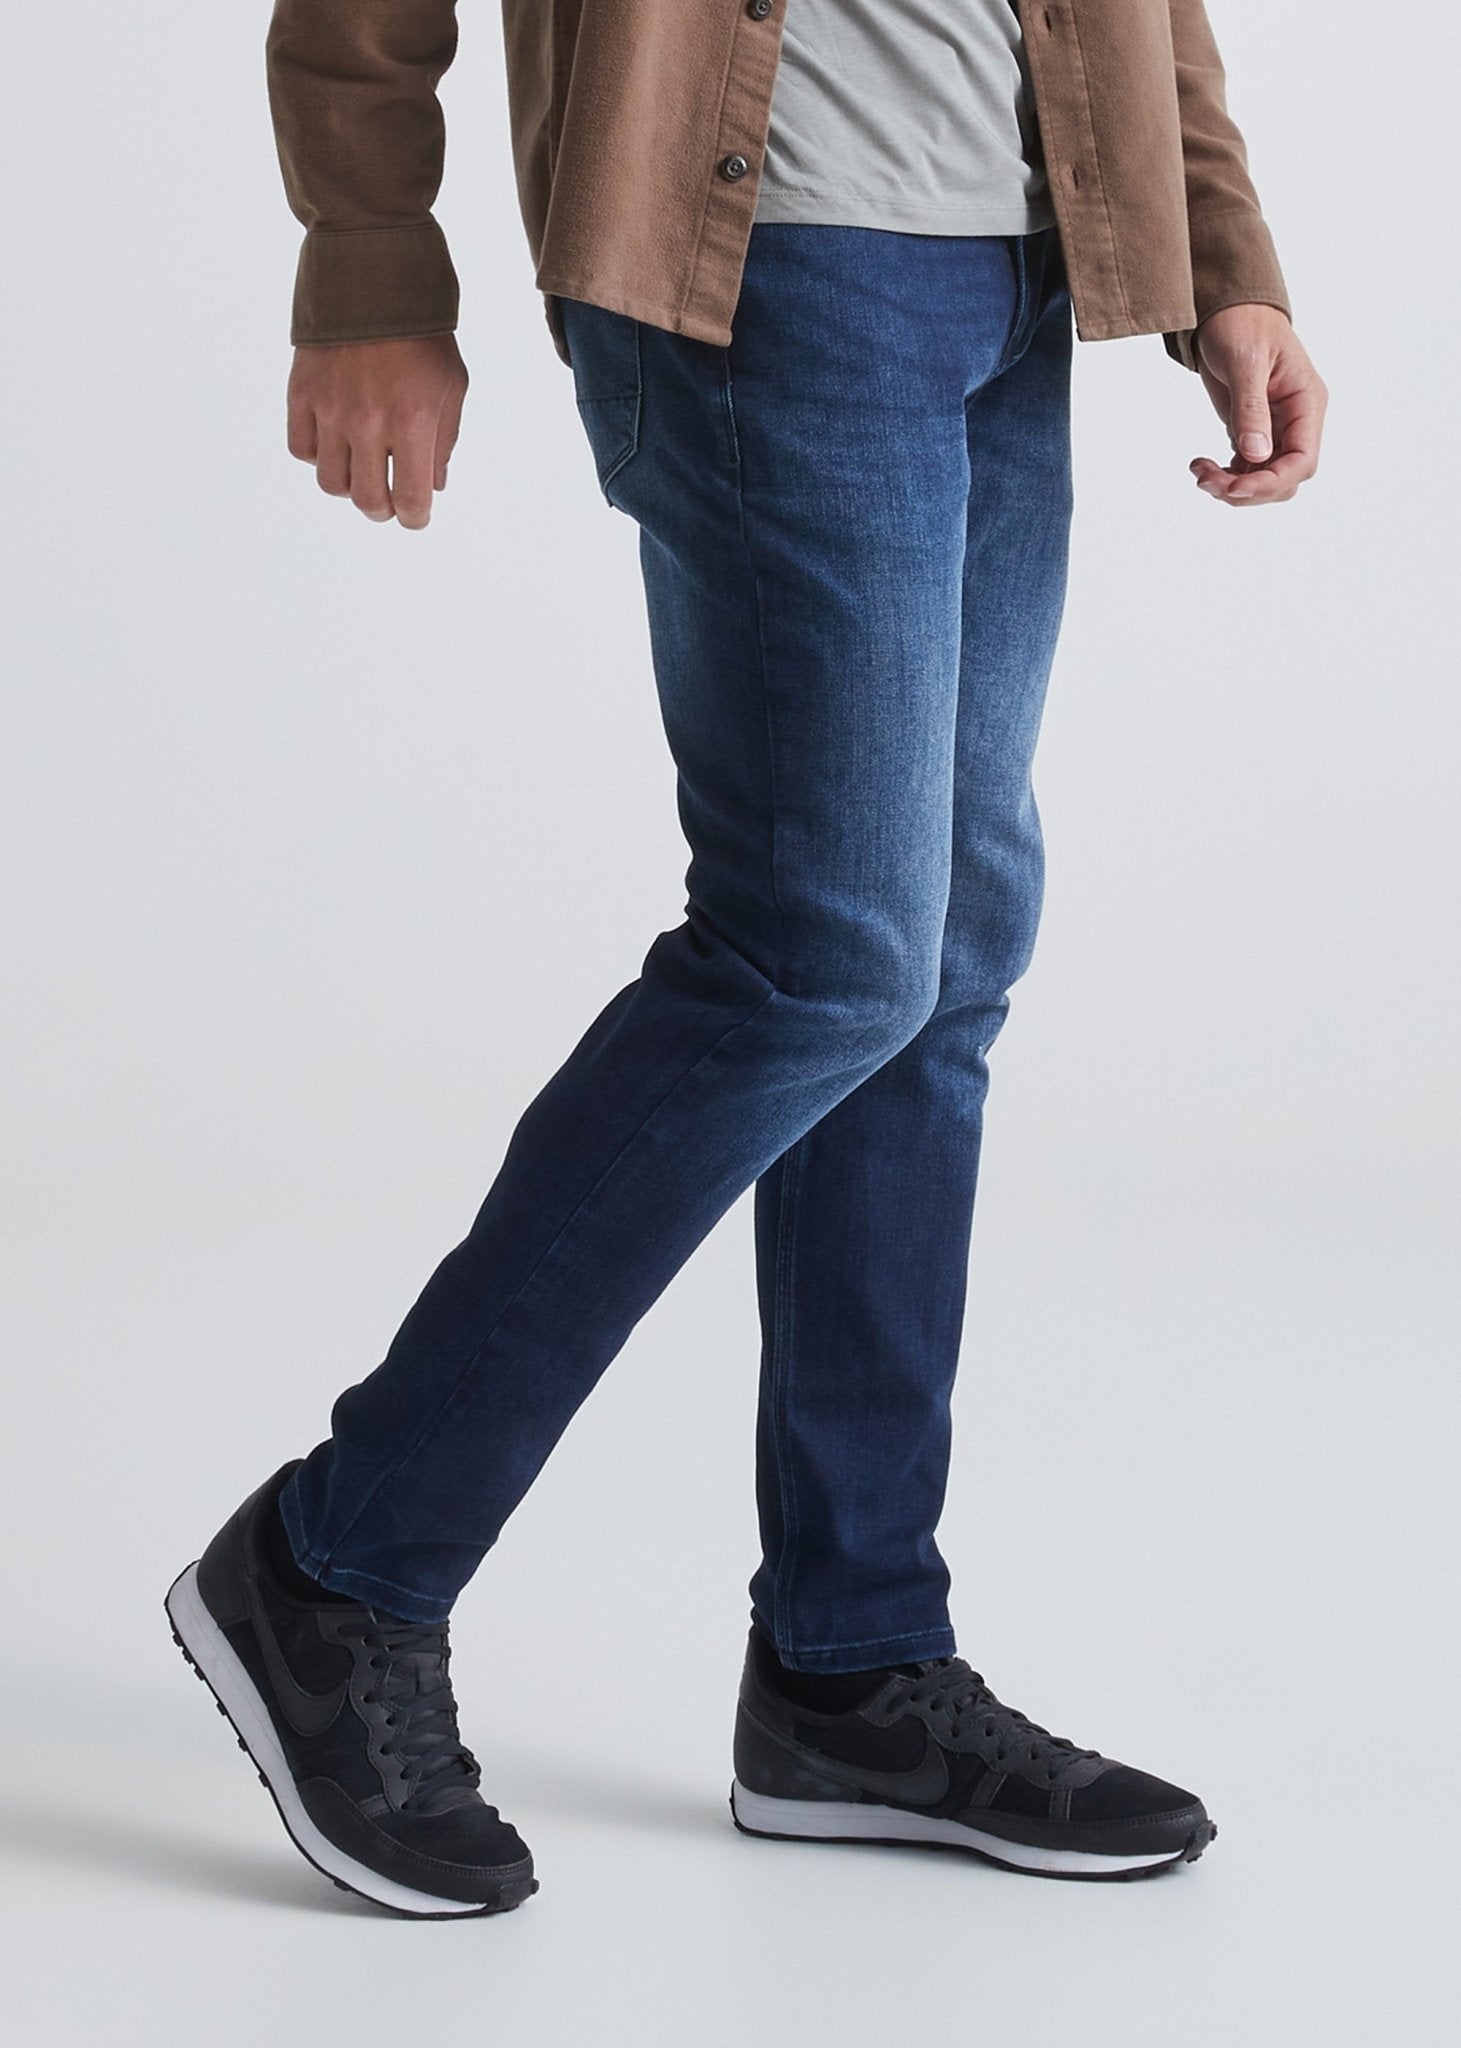 Men's Dark Wash Relaxed Fit Stretch Jeans